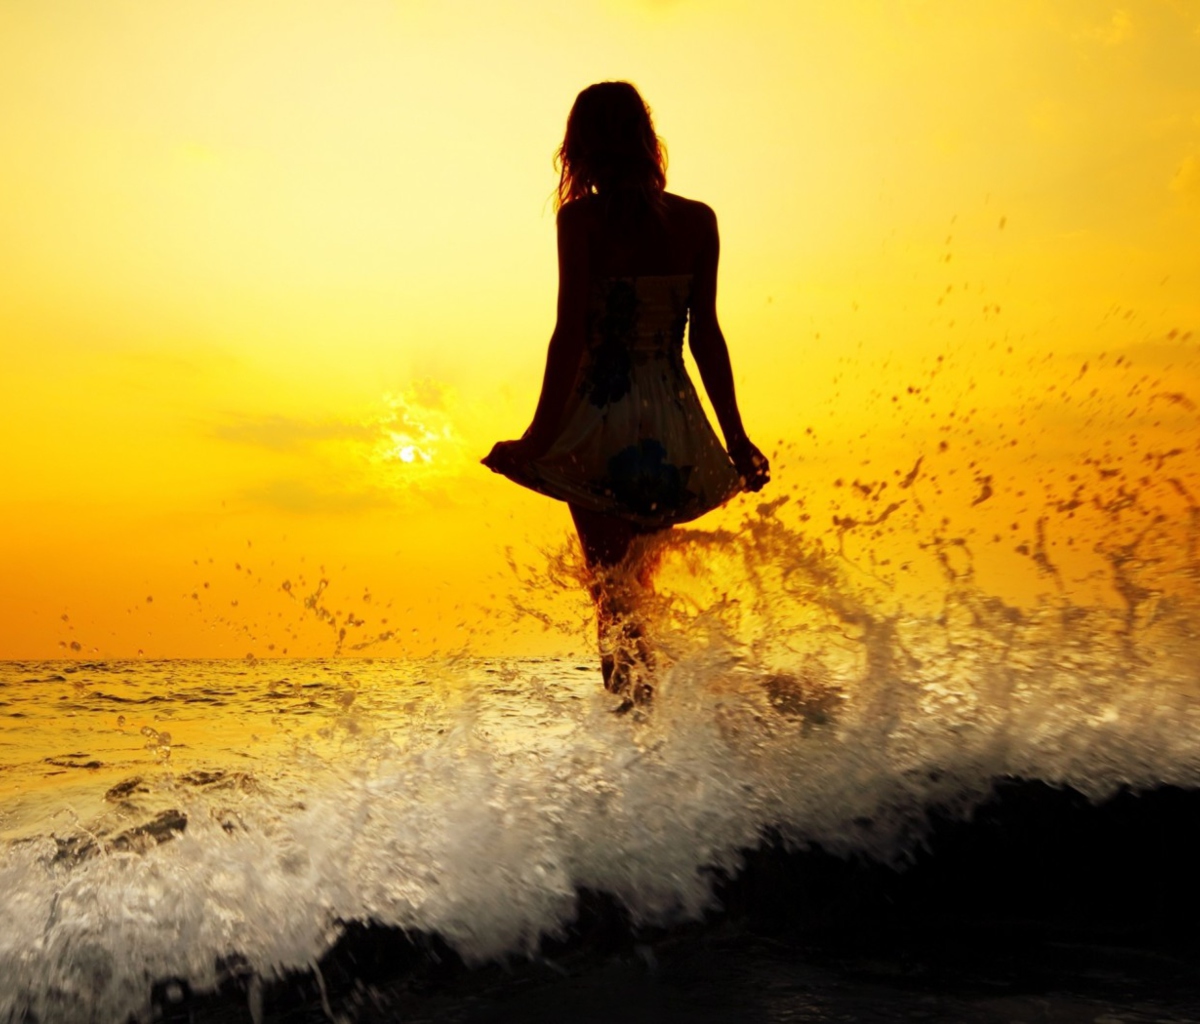 Girl Silhouette In Sea Waves At Sunset screenshot #1 1200x1024